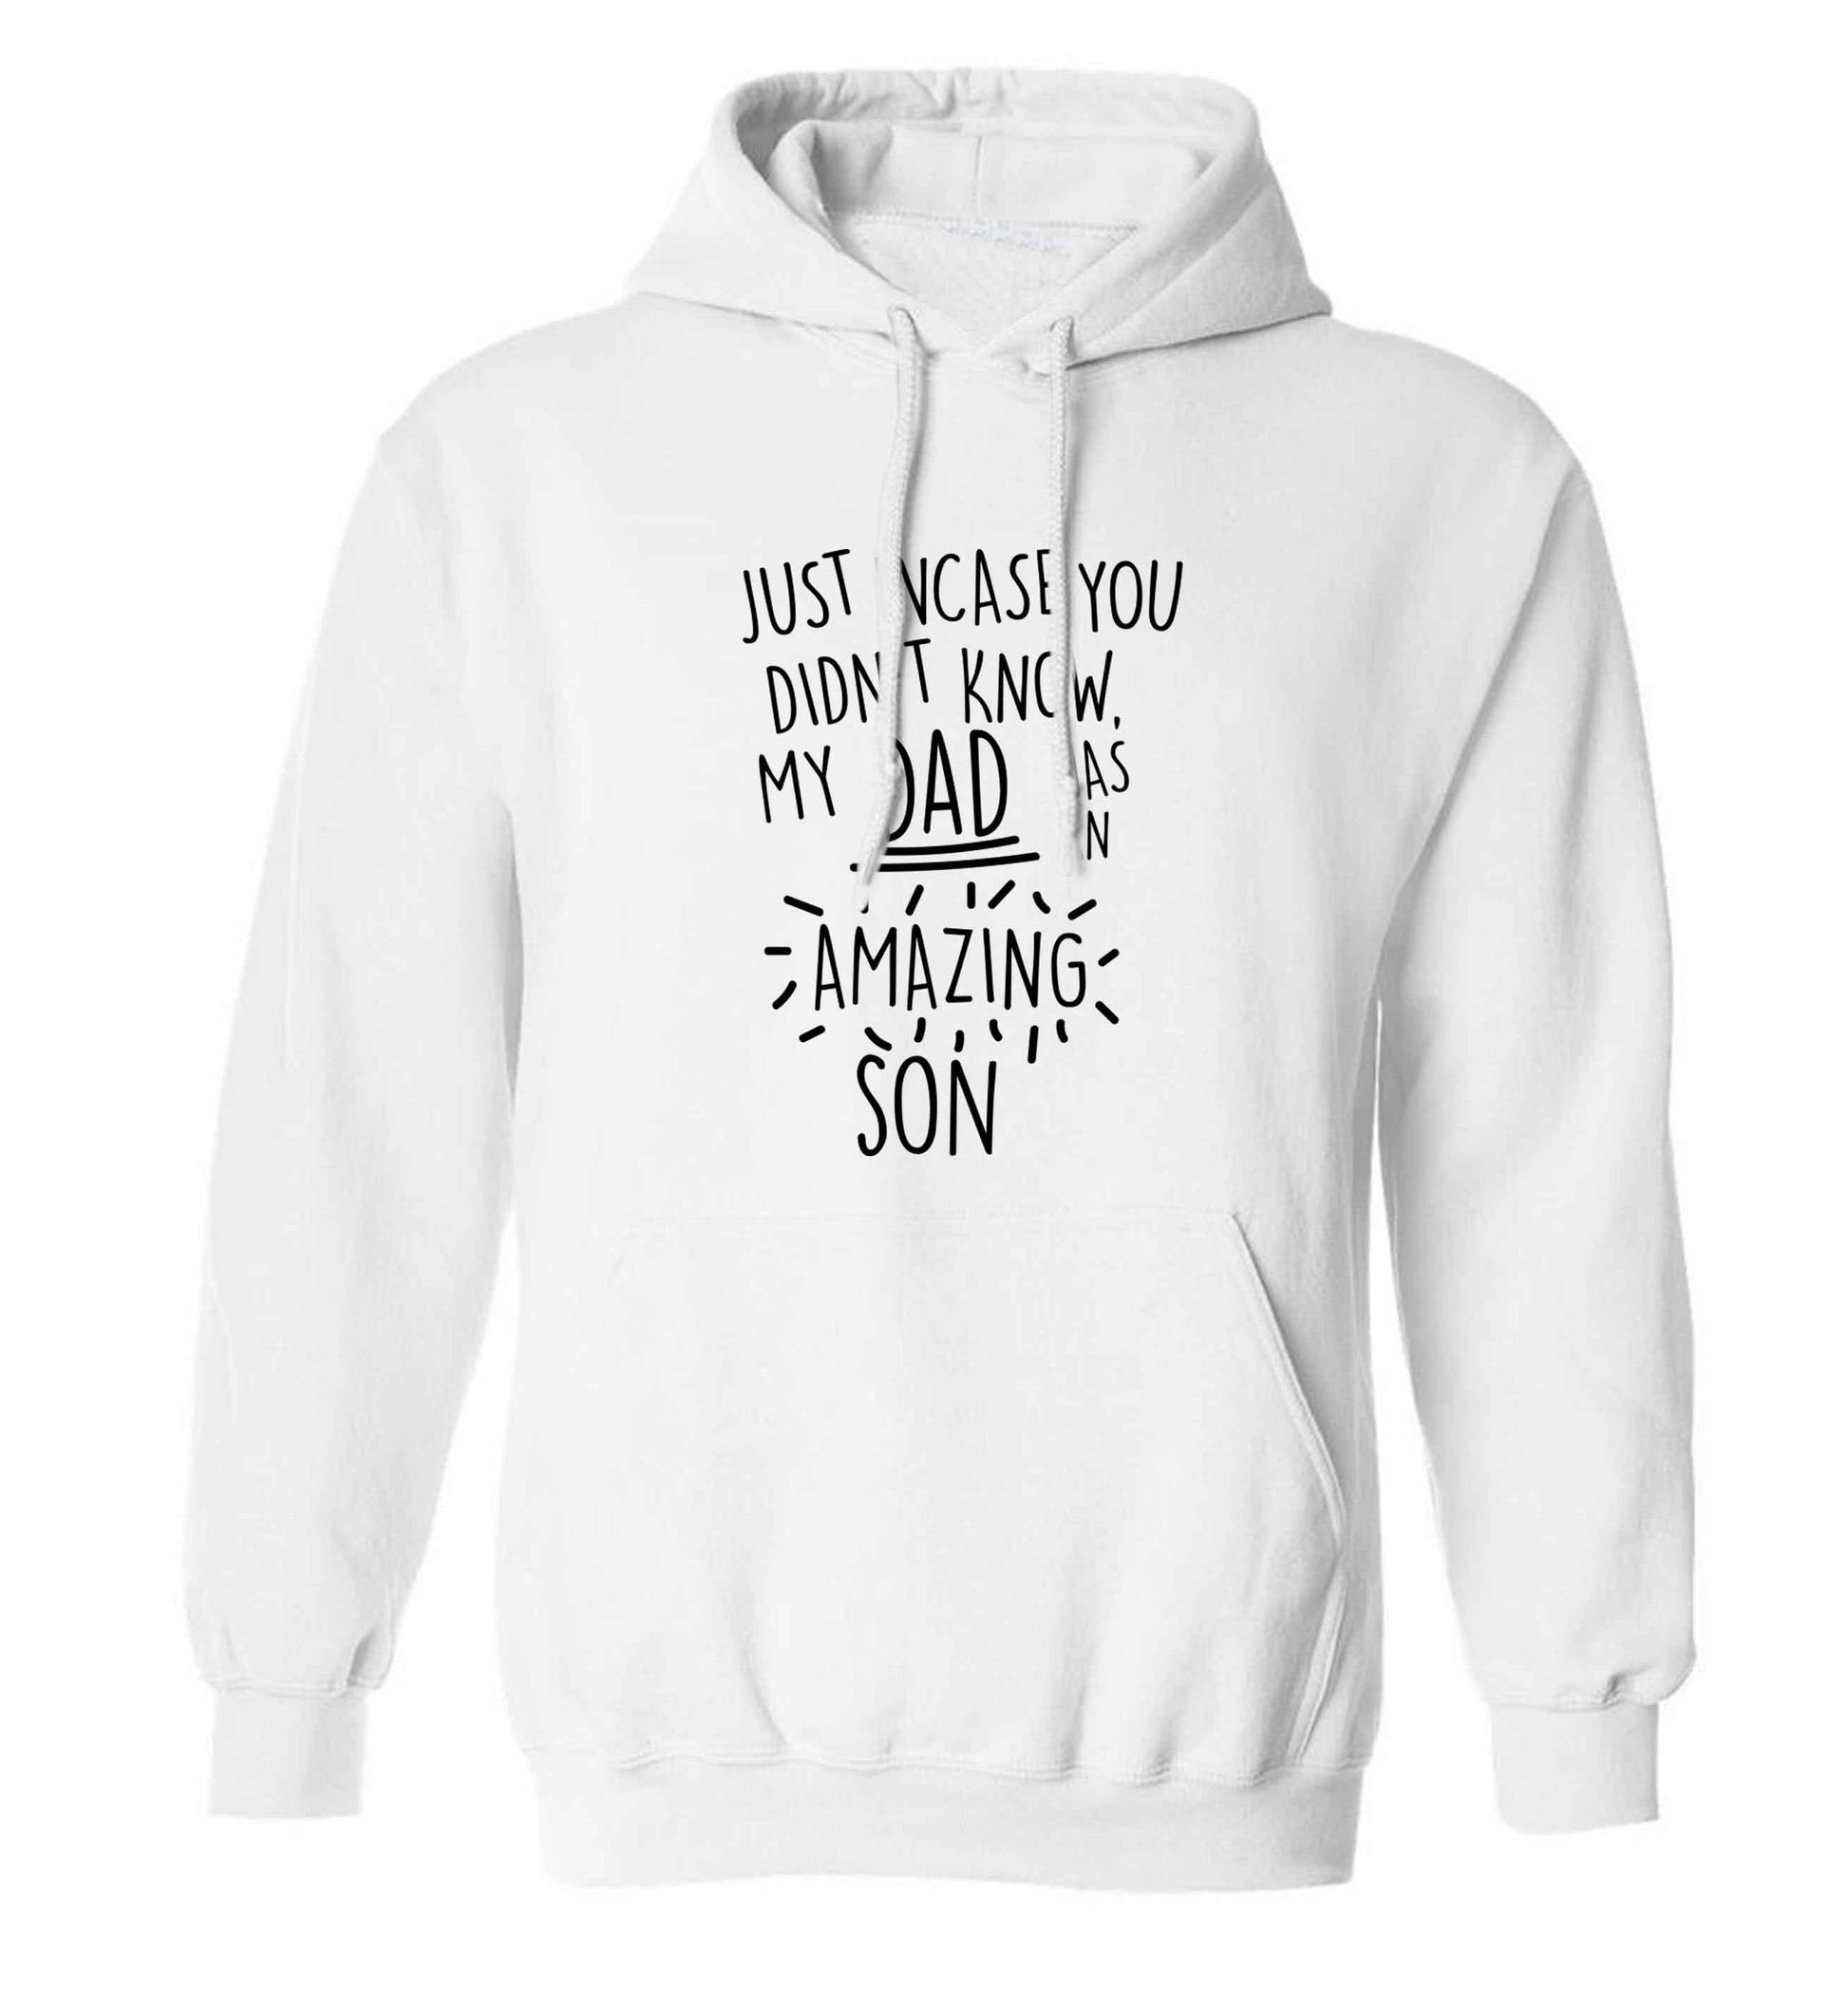 Just incase you didn't know my dad has an amazing son adults unisex white hoodie 2XL